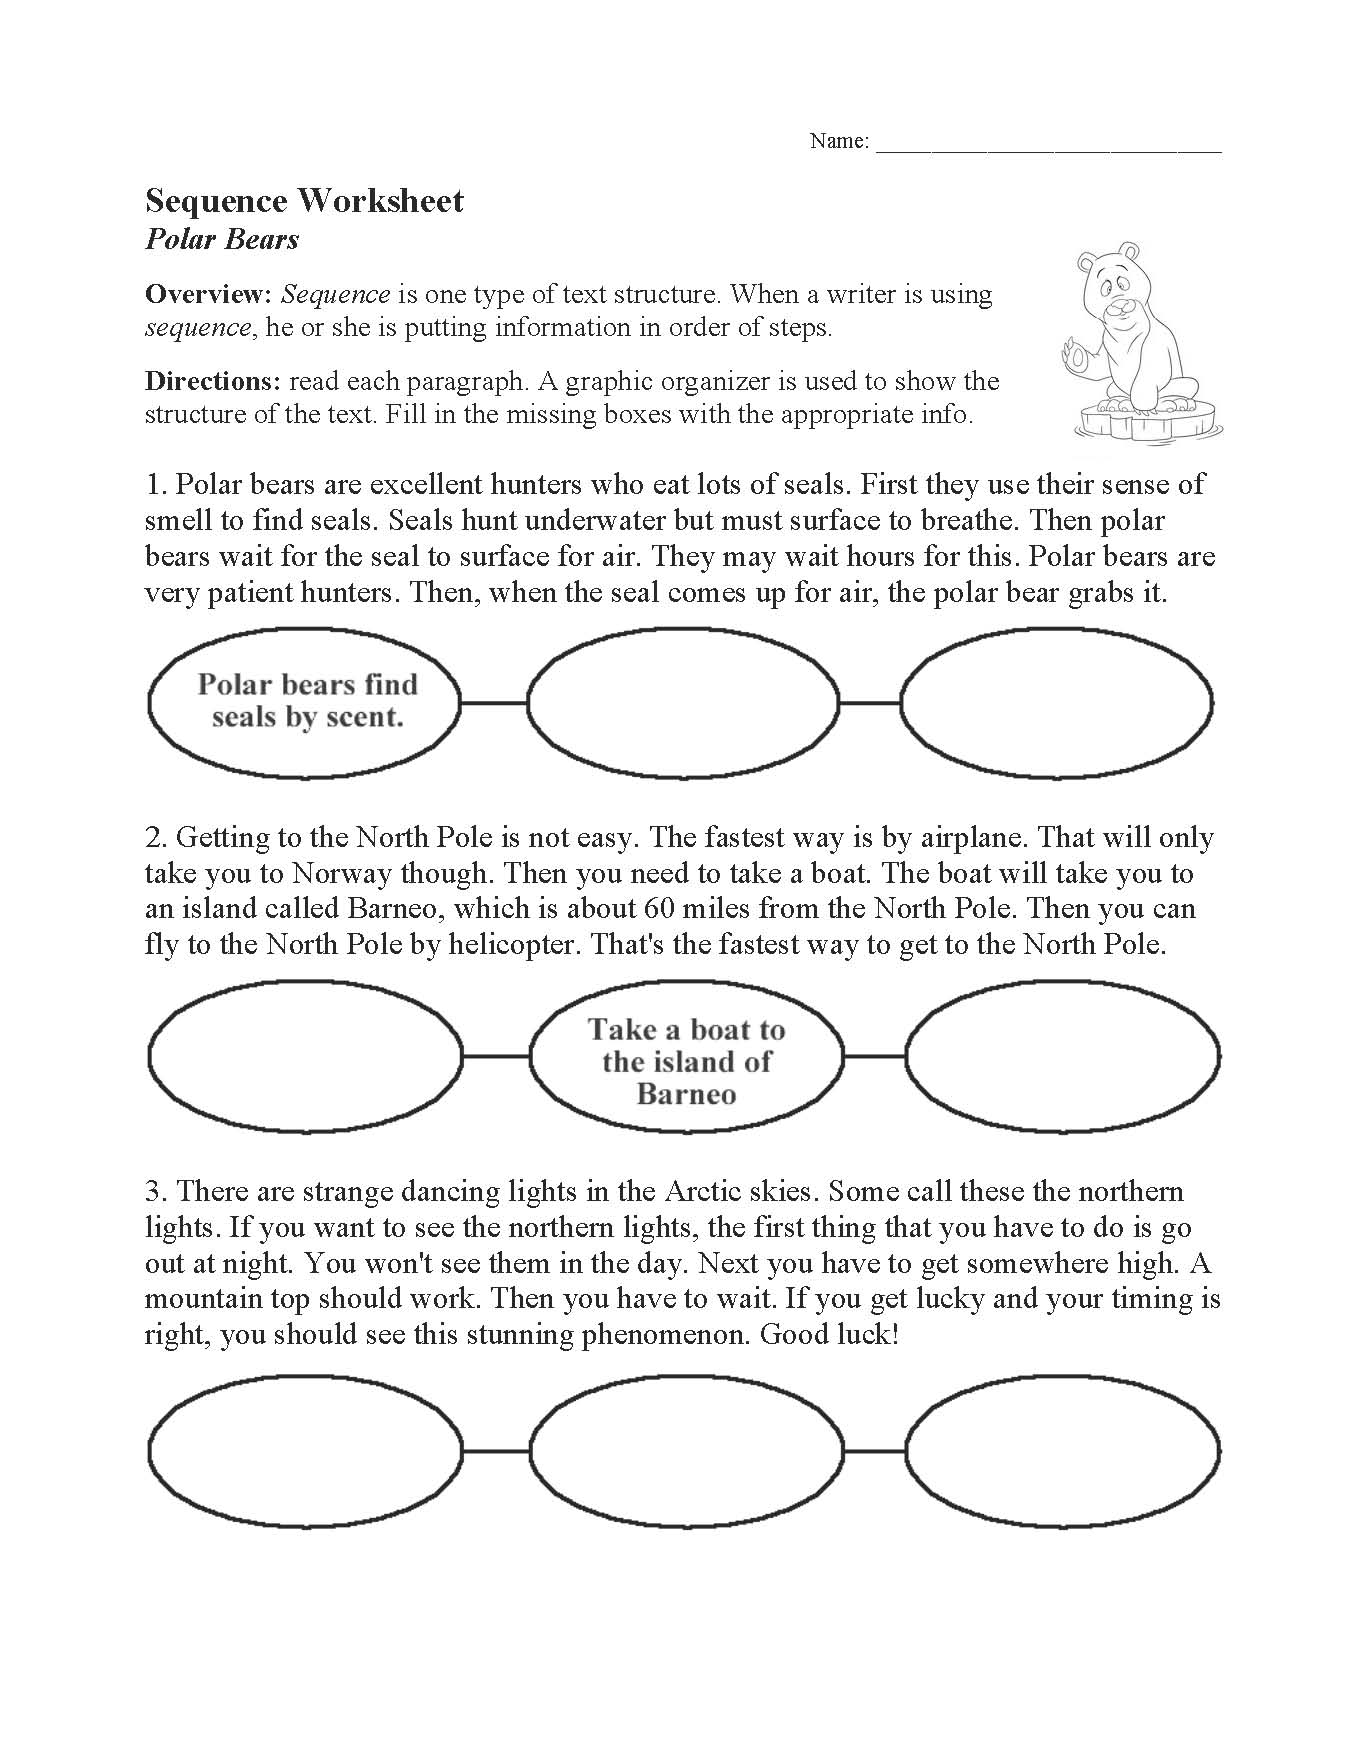 This is a preview image of our Sequence Worksheet. Click on it to enlarge or view the source file.